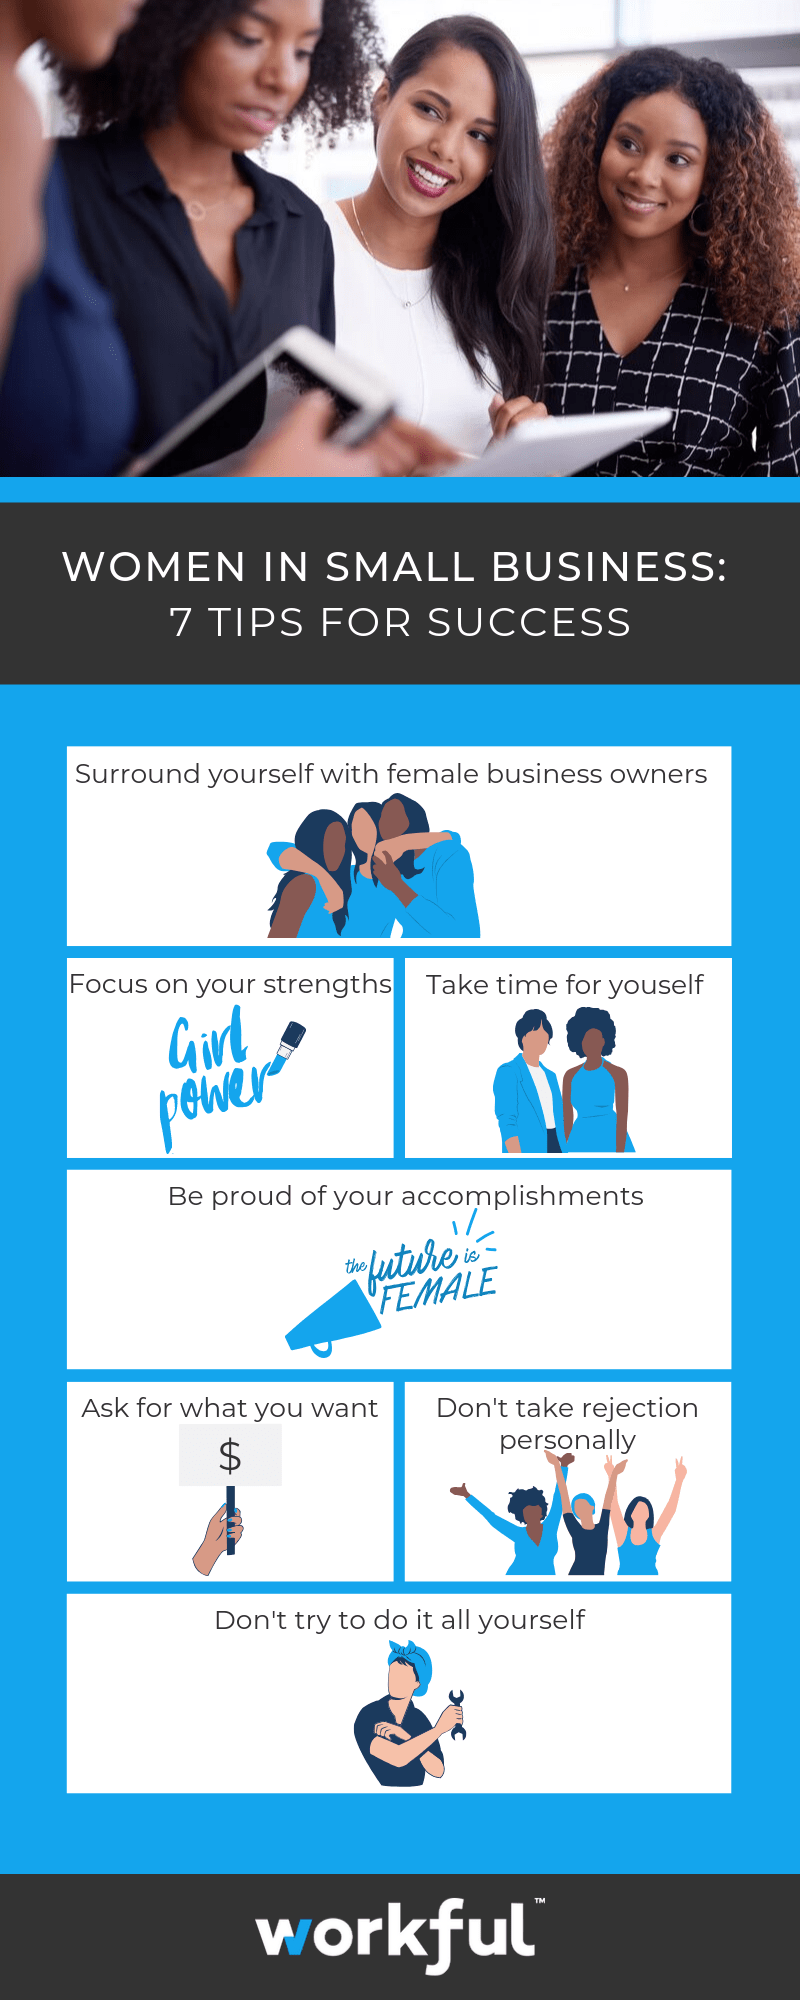 Infographic containing 7 tips for success for women small business owners